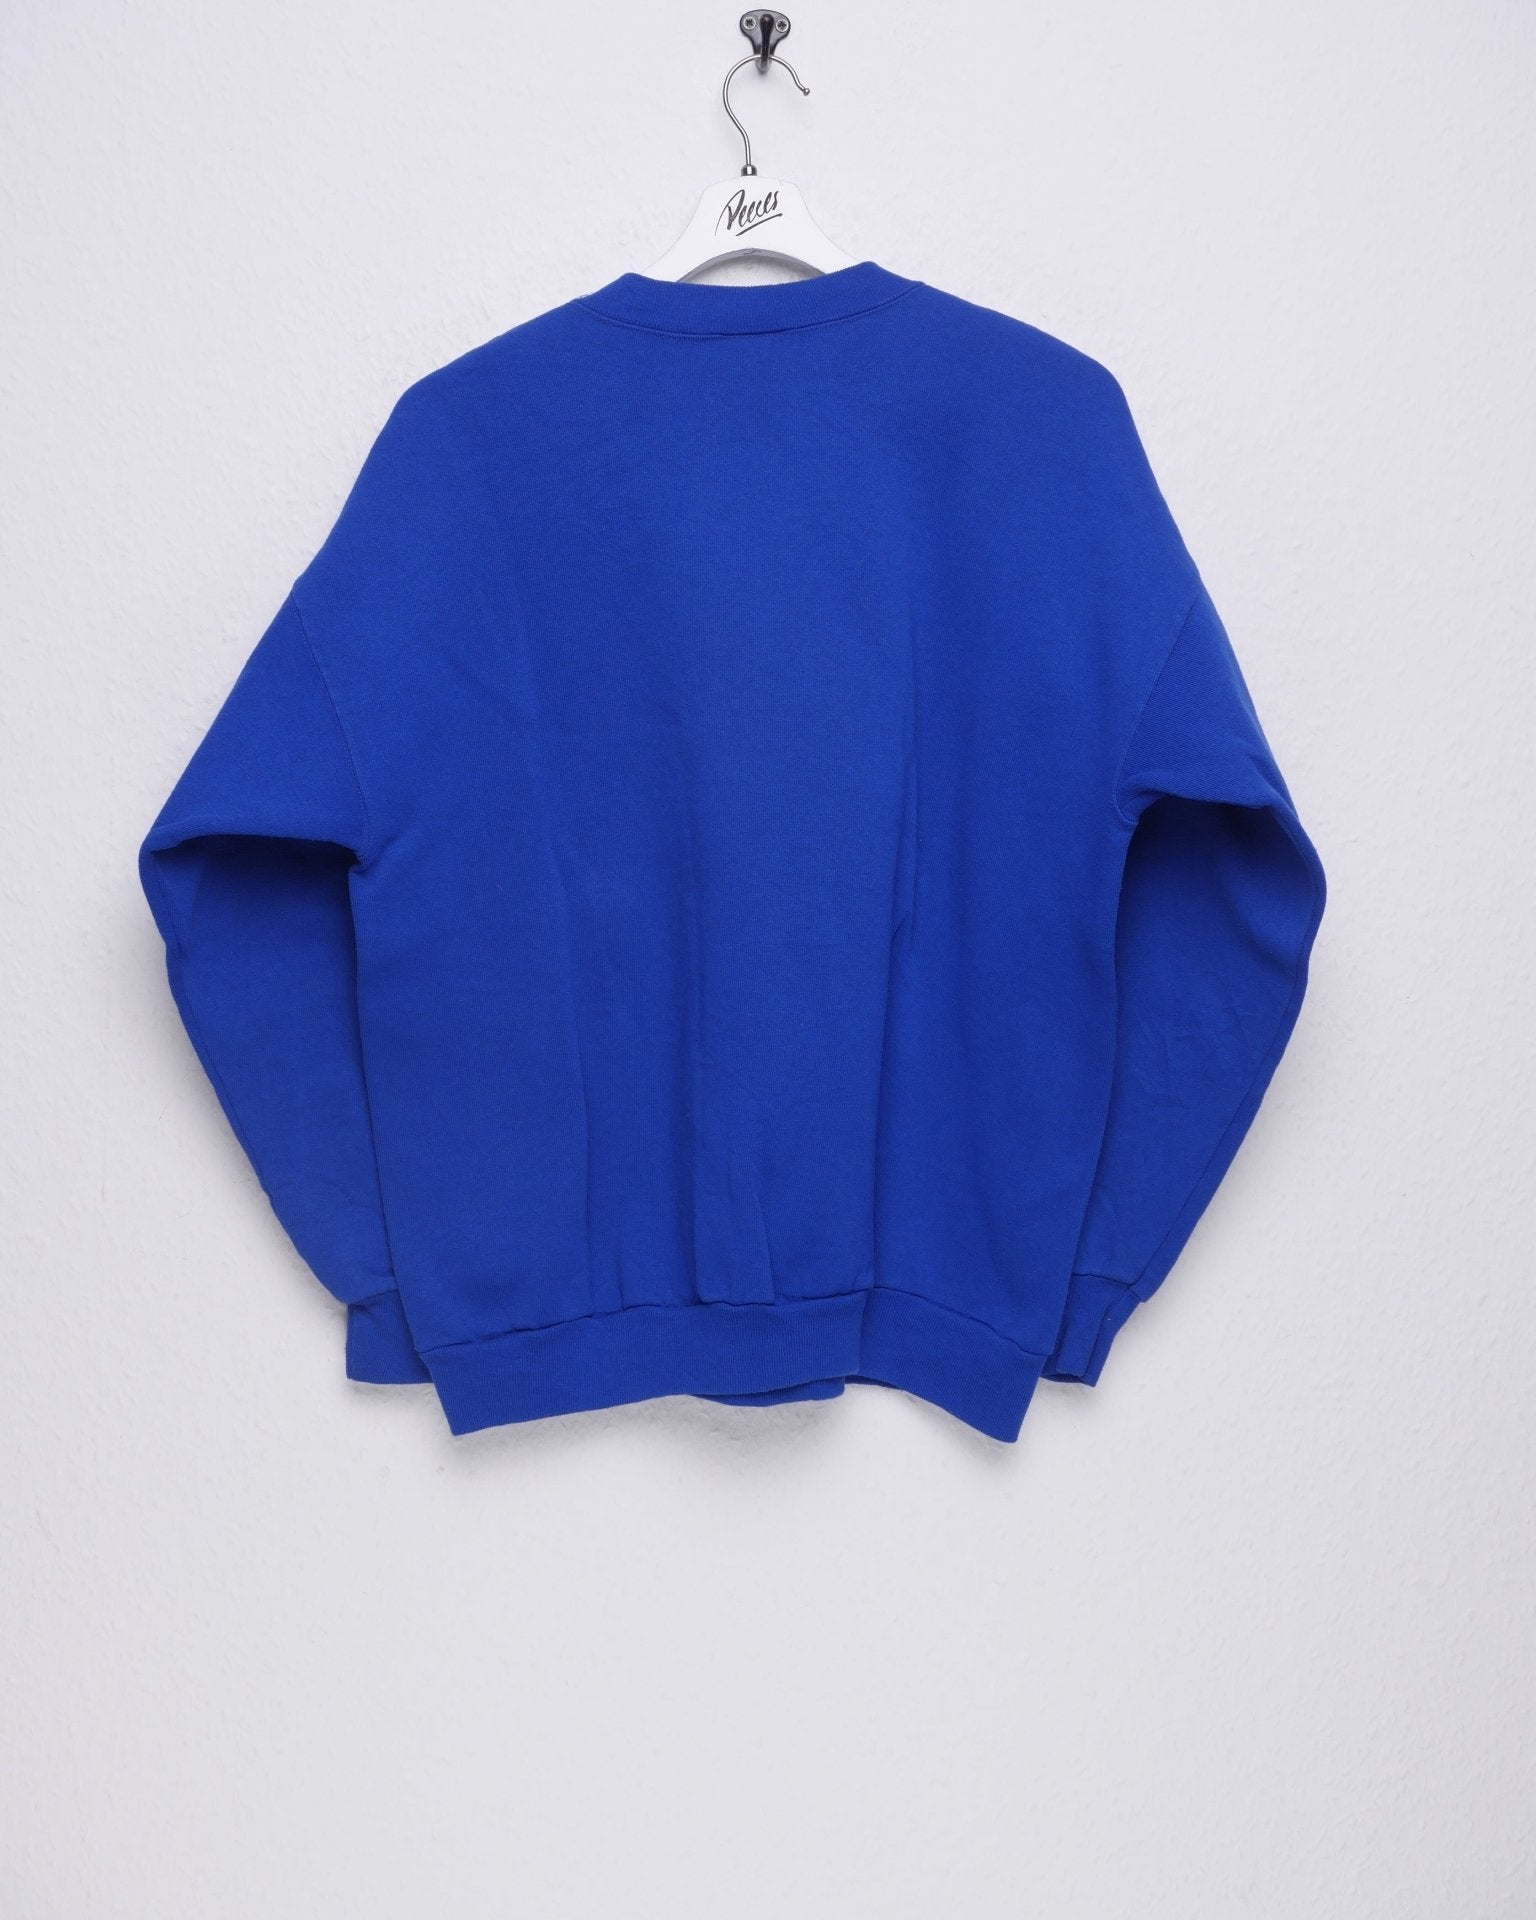 Aged to Perfection printed Spellout blue Sweater - Peeces